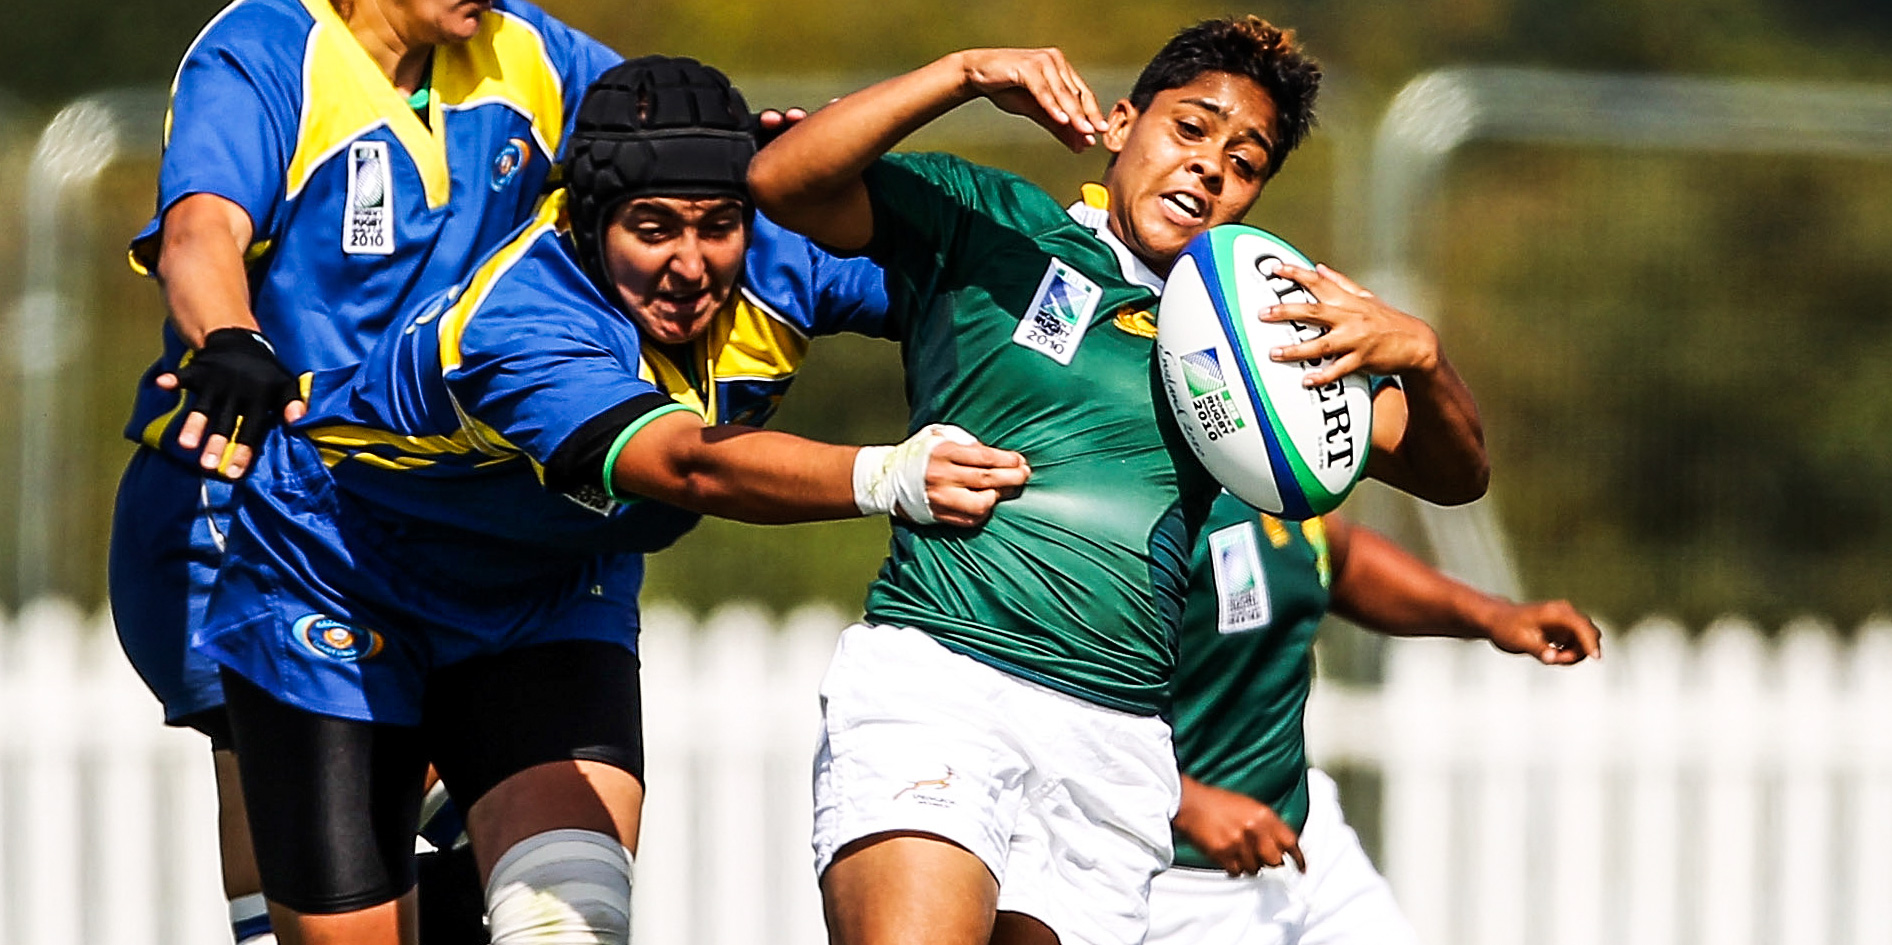 Jordaan as a fresh-faced 19-year-old at the Rugby World Cup in 2010.